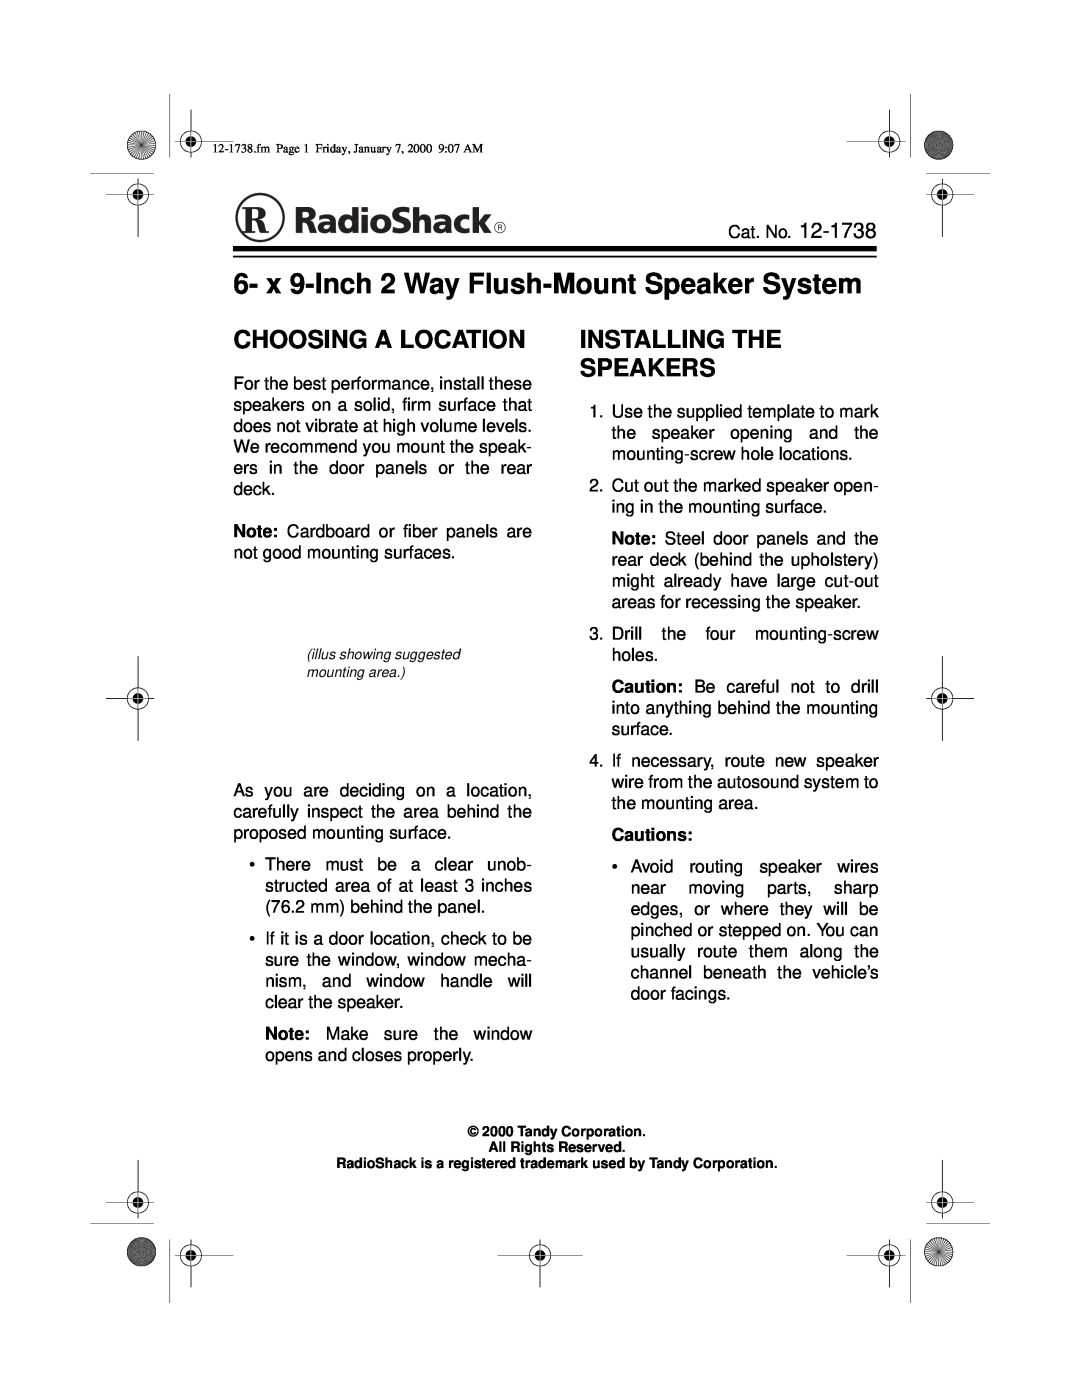 Radio Shack 12-1738 manual Choosing A Location, Installing The Speakers, Cautions 